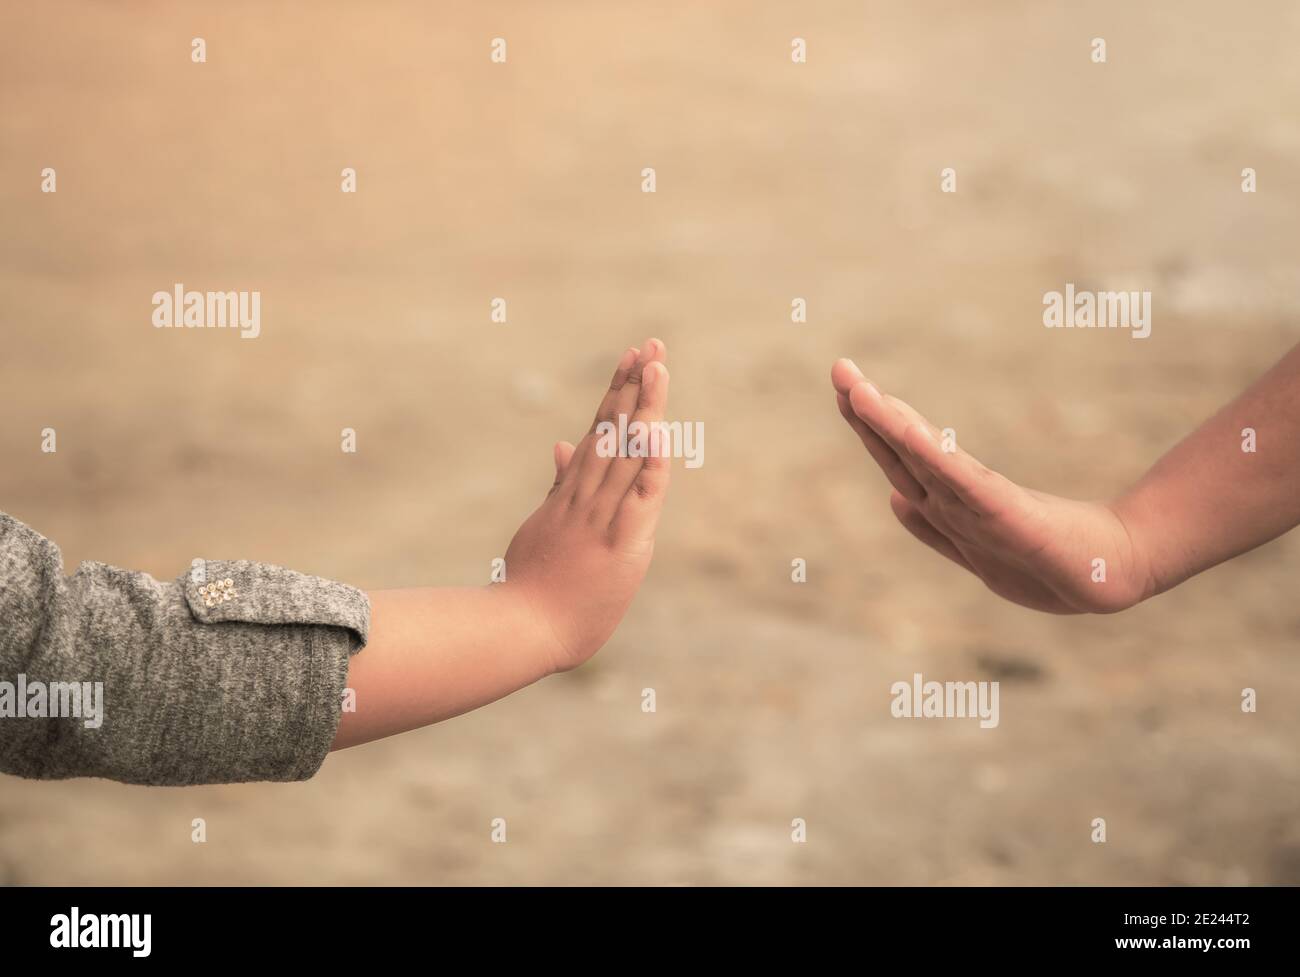 Selective focus shot of two young children's hands reaching out to touch each other Stock Photo